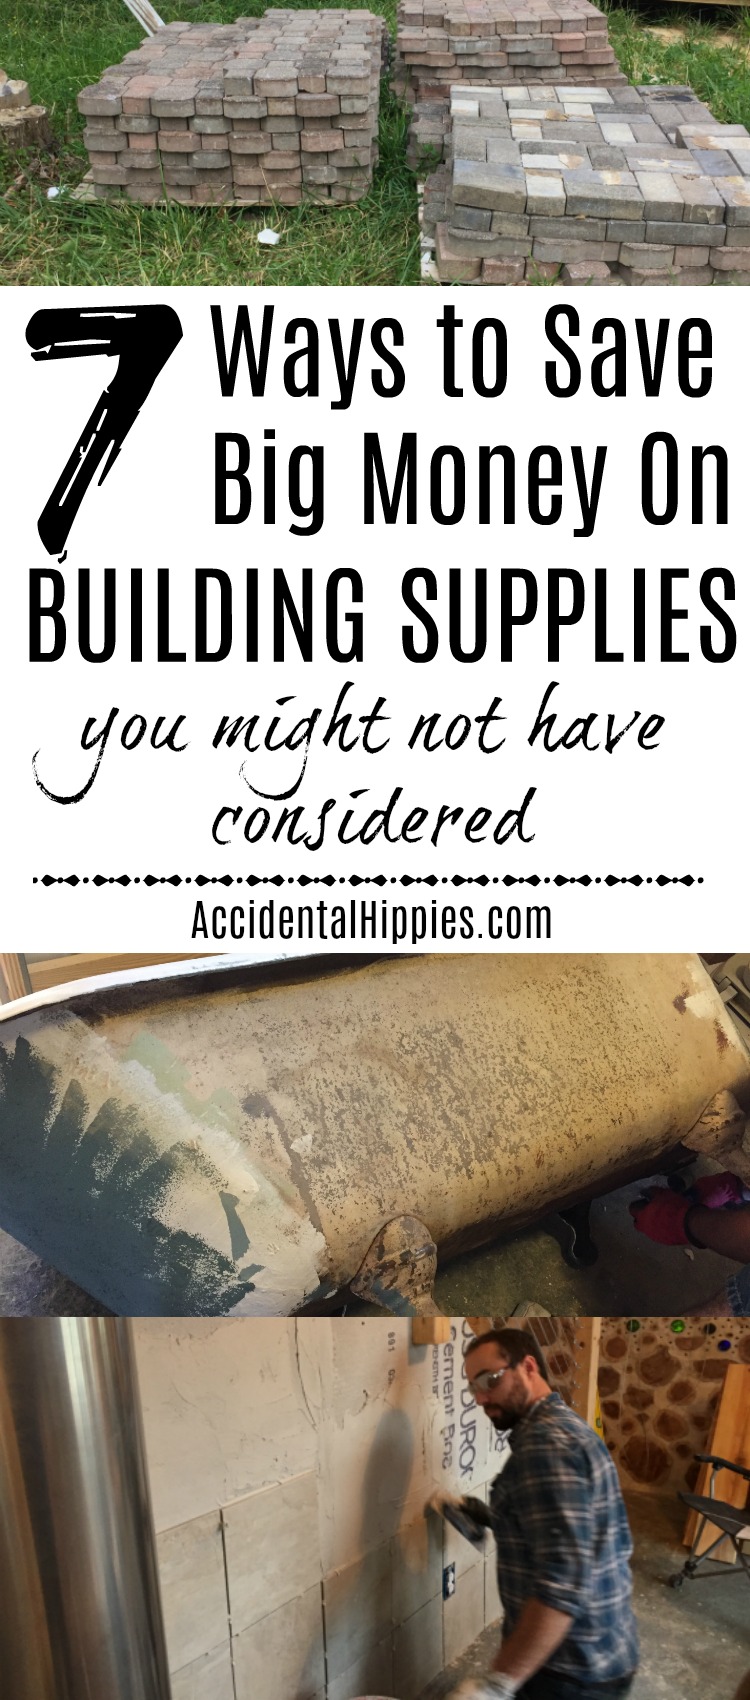 Reader suggestions for even more ways to save money on building supplies. I wish we'd done more of number 3!